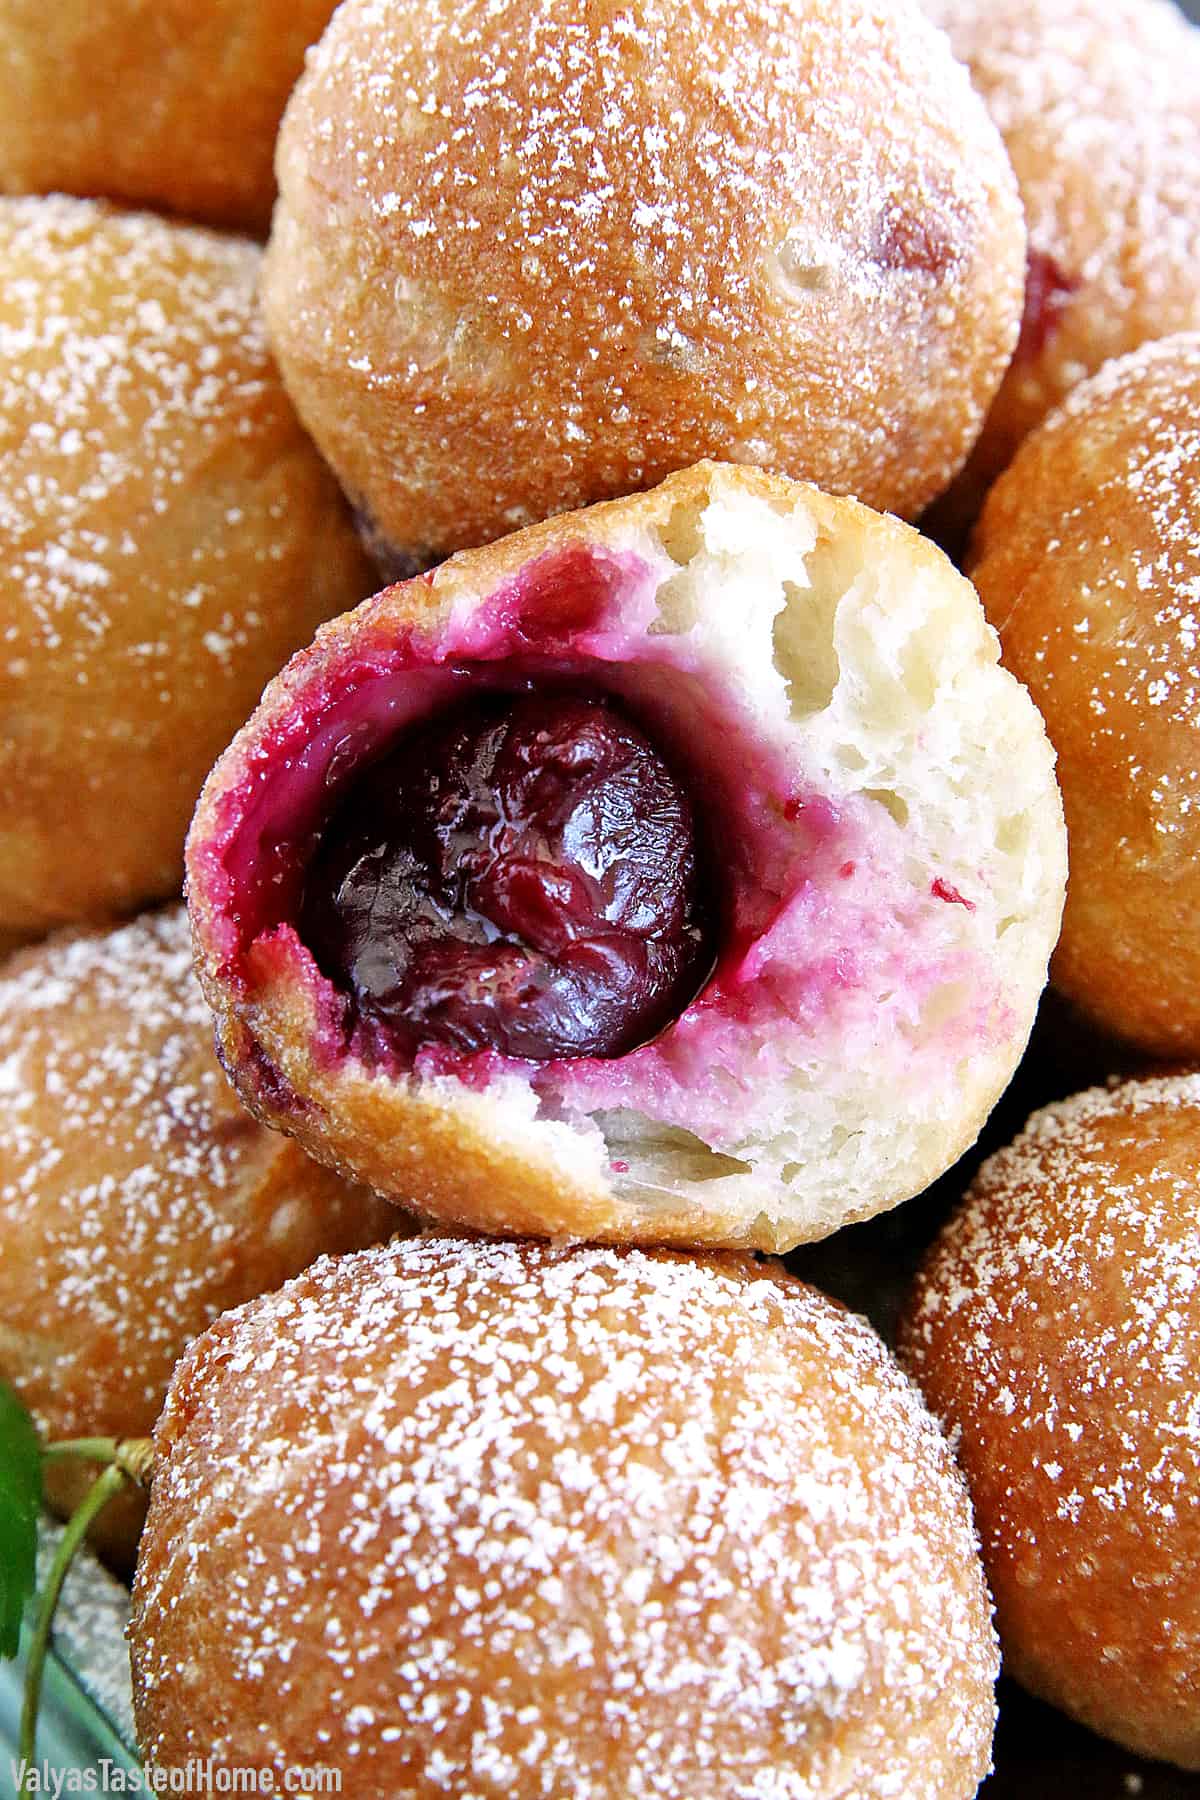 Ponchiki are often enjoyed as a special treat during festivals, holidays, or family gatherings in Ukraine. They bring a sense of nostalgia and comfort, reminding me of cherished traditions passed down through generations.